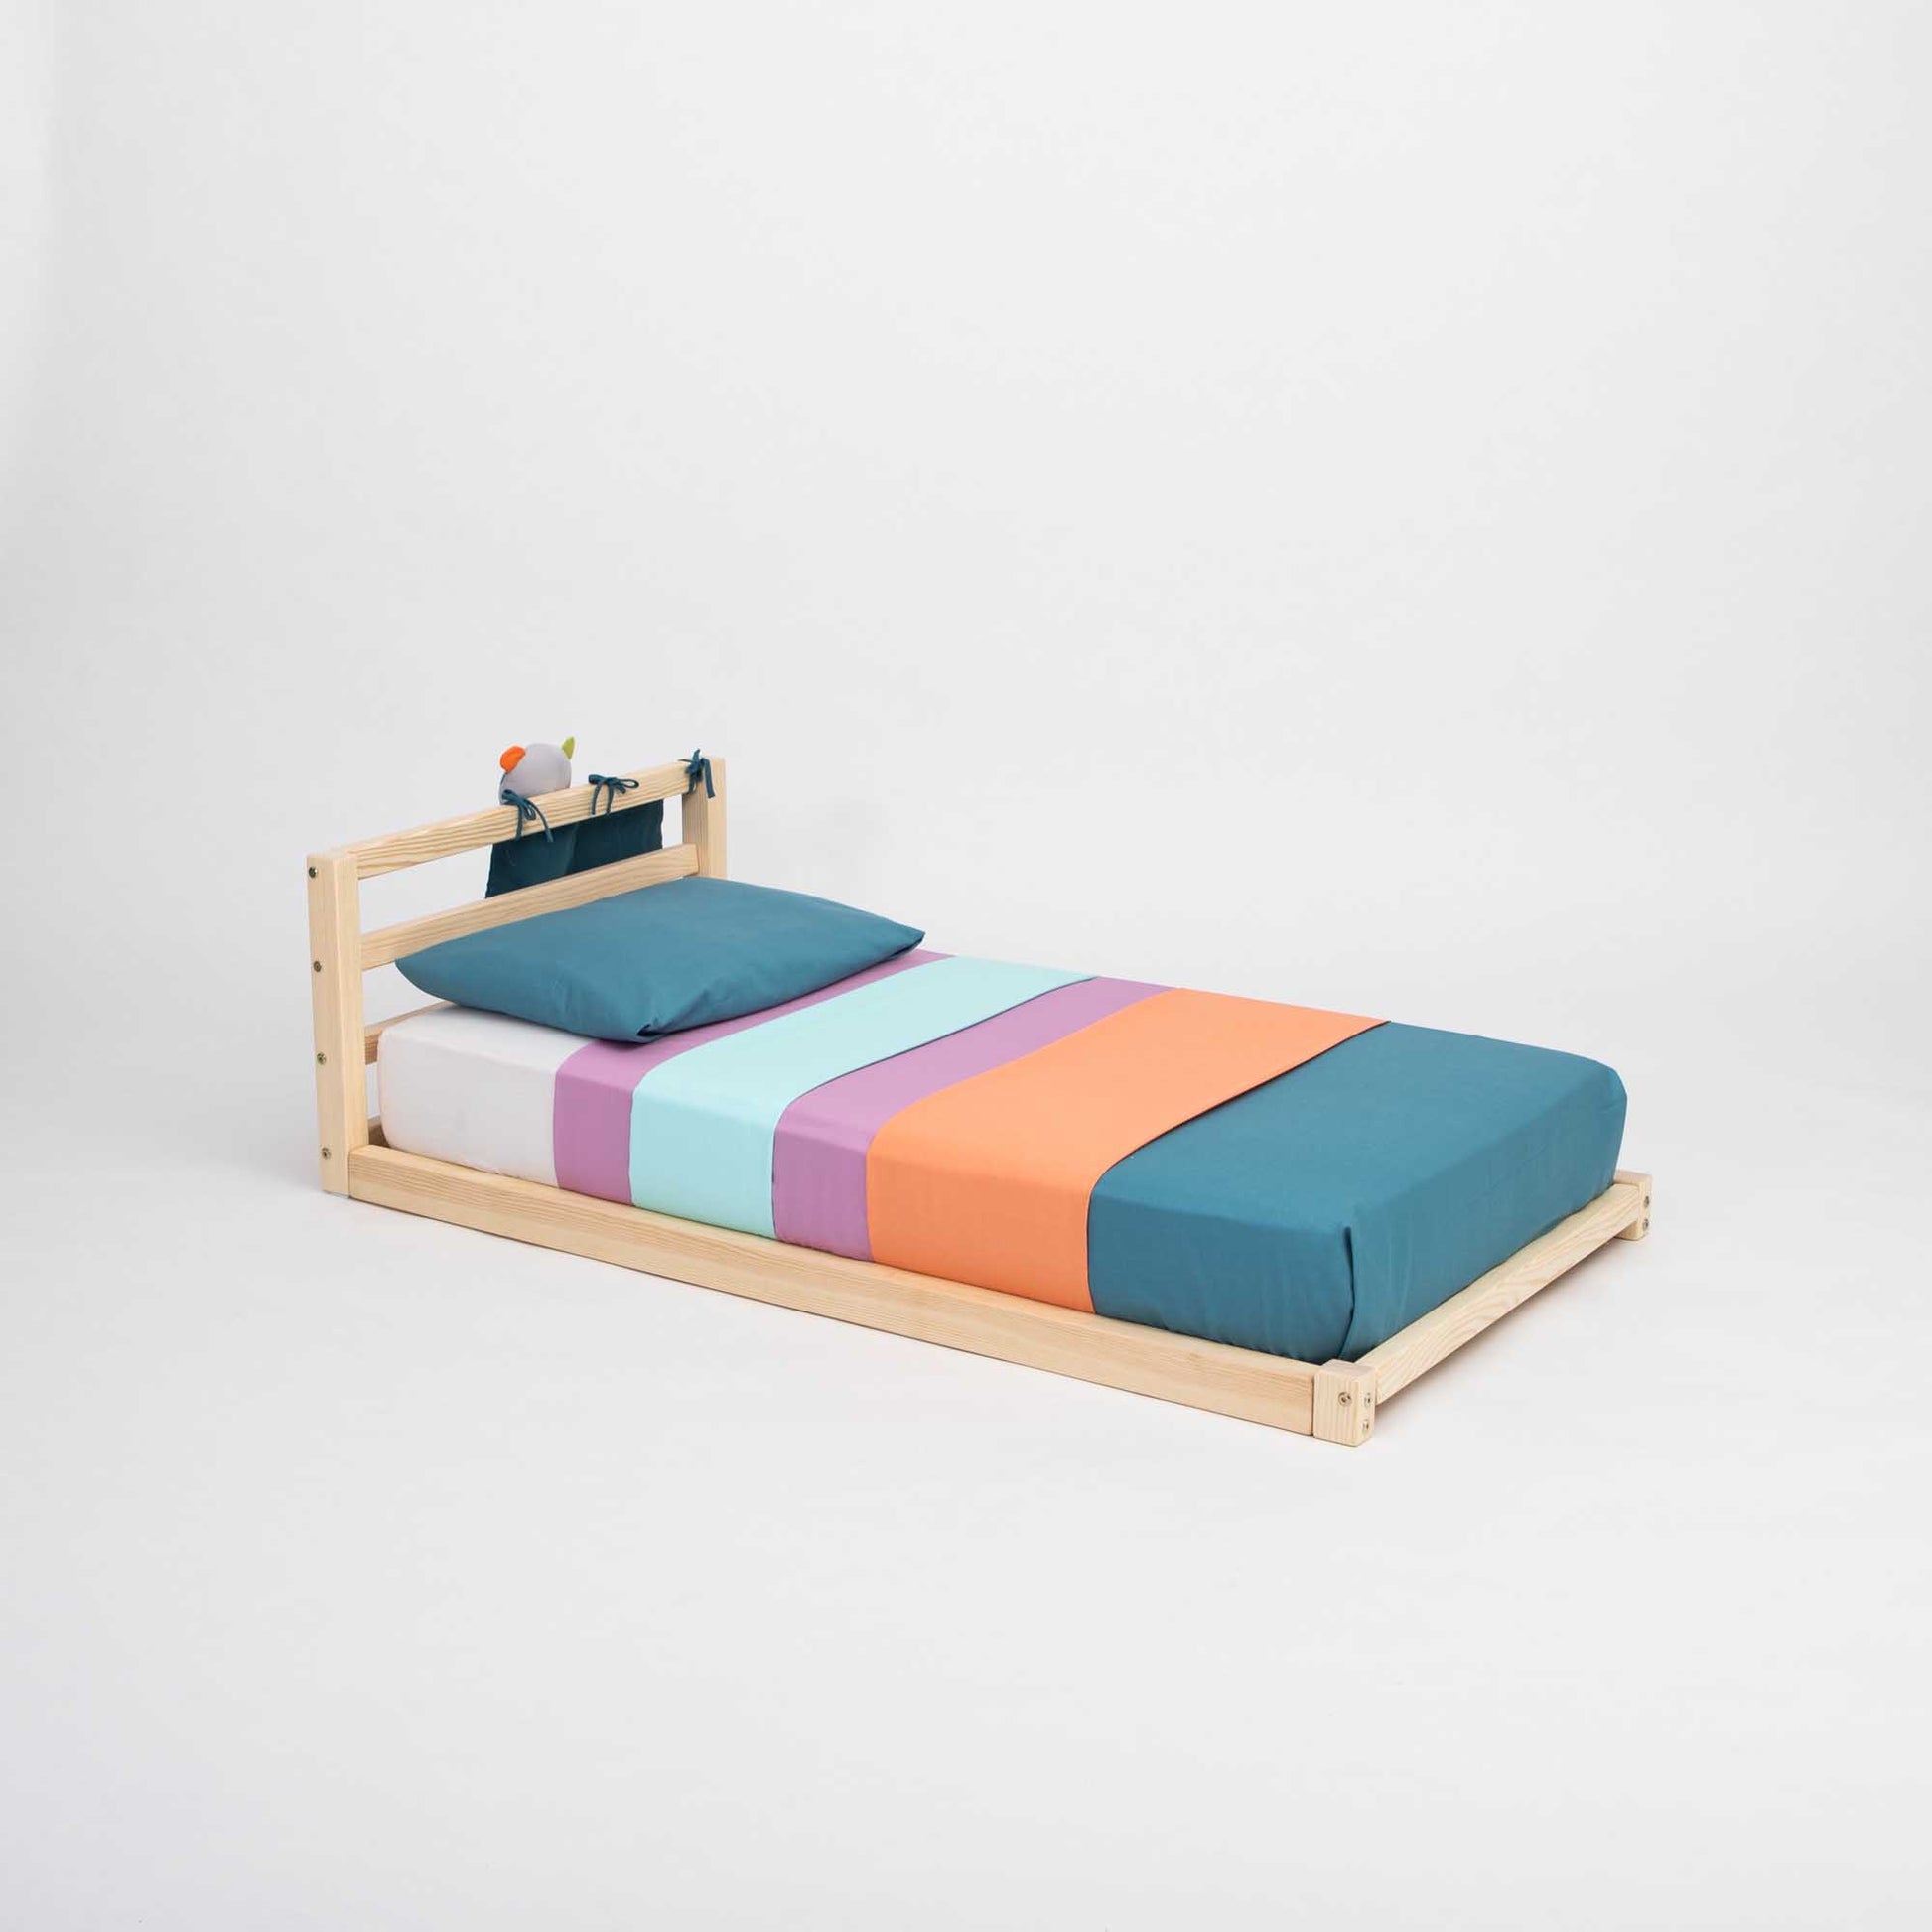 A Sweet Home From Wood toddler floor bed with a horizontal rail headboard, perfect for boys and girls.